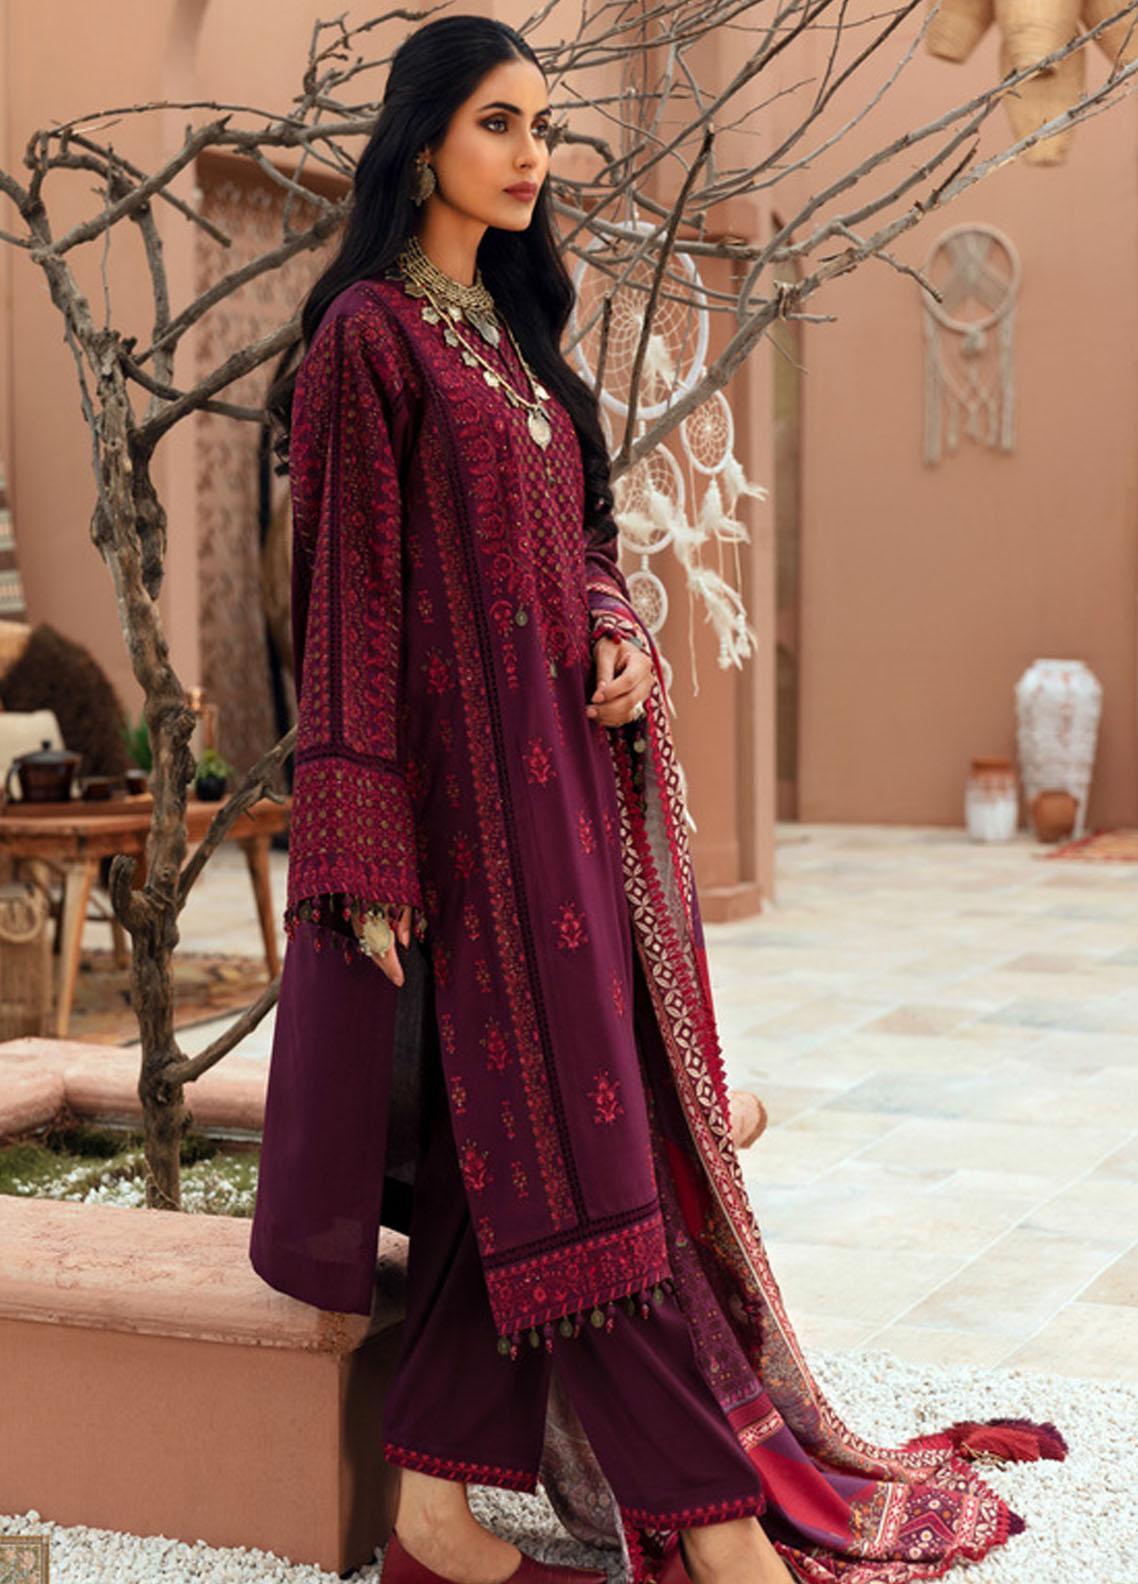 noor-by-saadia-asad-embroidered-shawls-2021-collection-01-_01